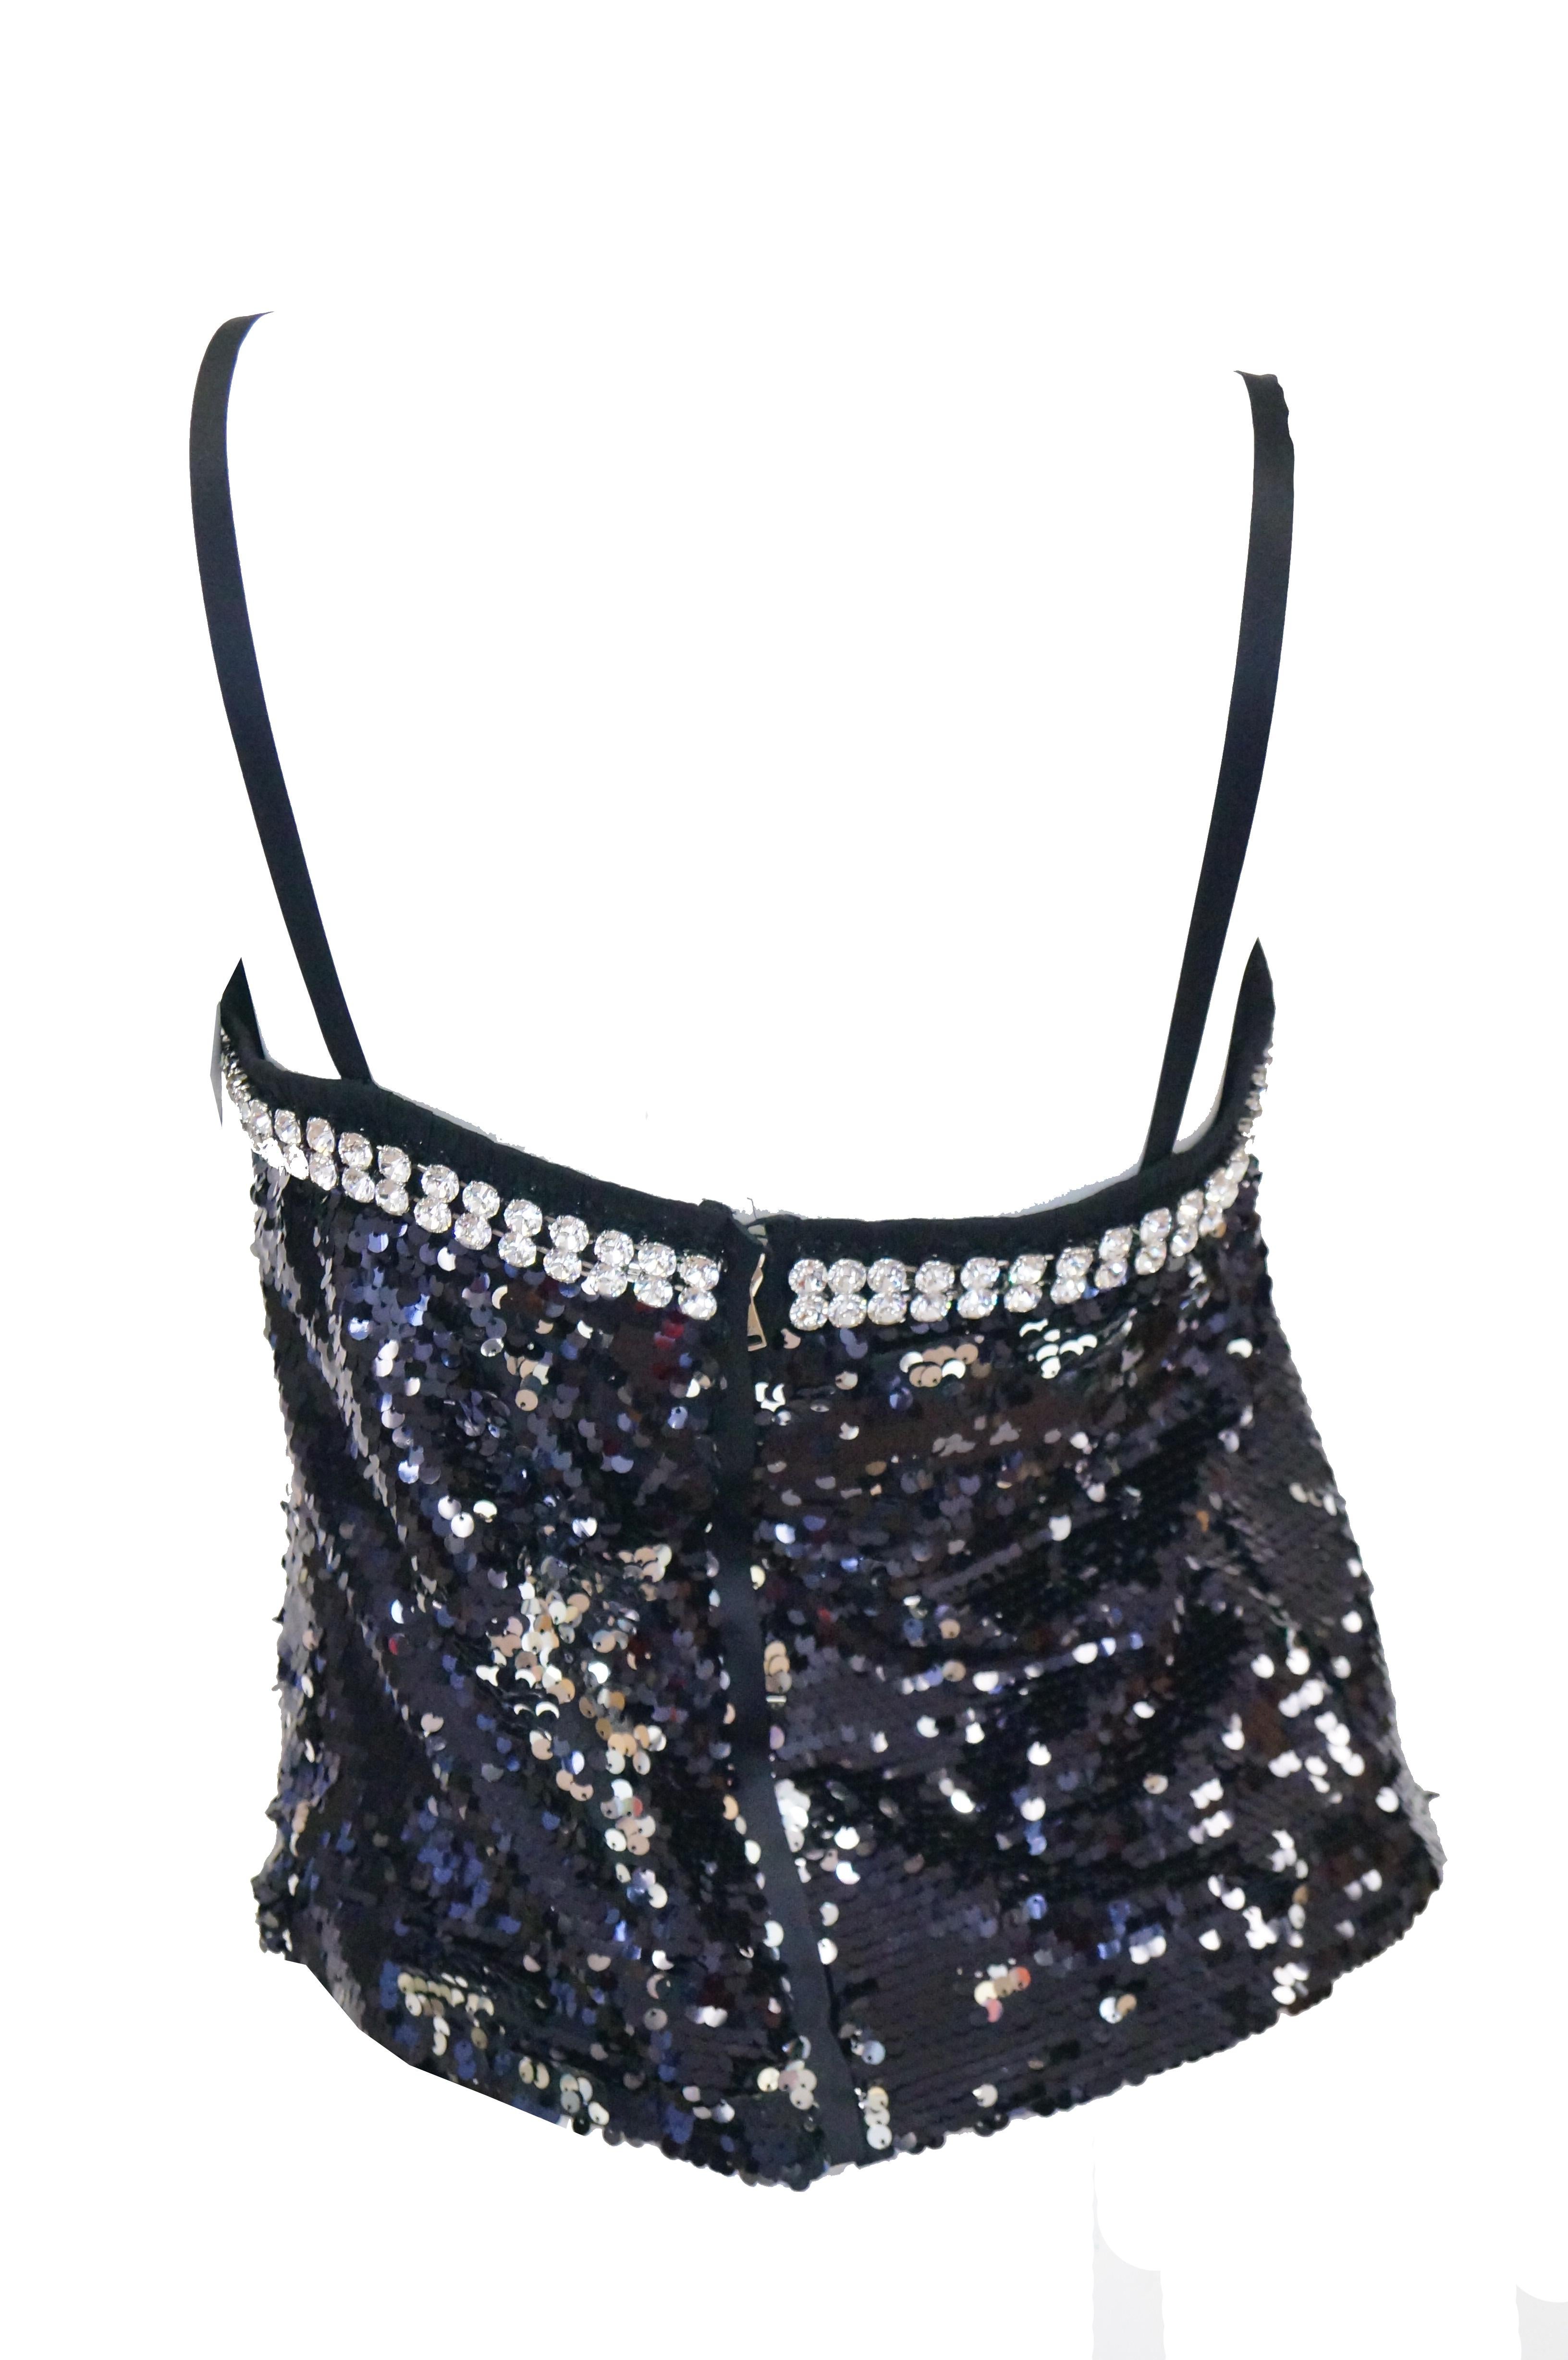 Brilliant loose shift tube - top - style camisole spaghetti strap top by Dolce & Gabbana! The body features two tone sequins in black and silver for added fun and versatility. The edge of the camisole features a double border of brilliant oversized